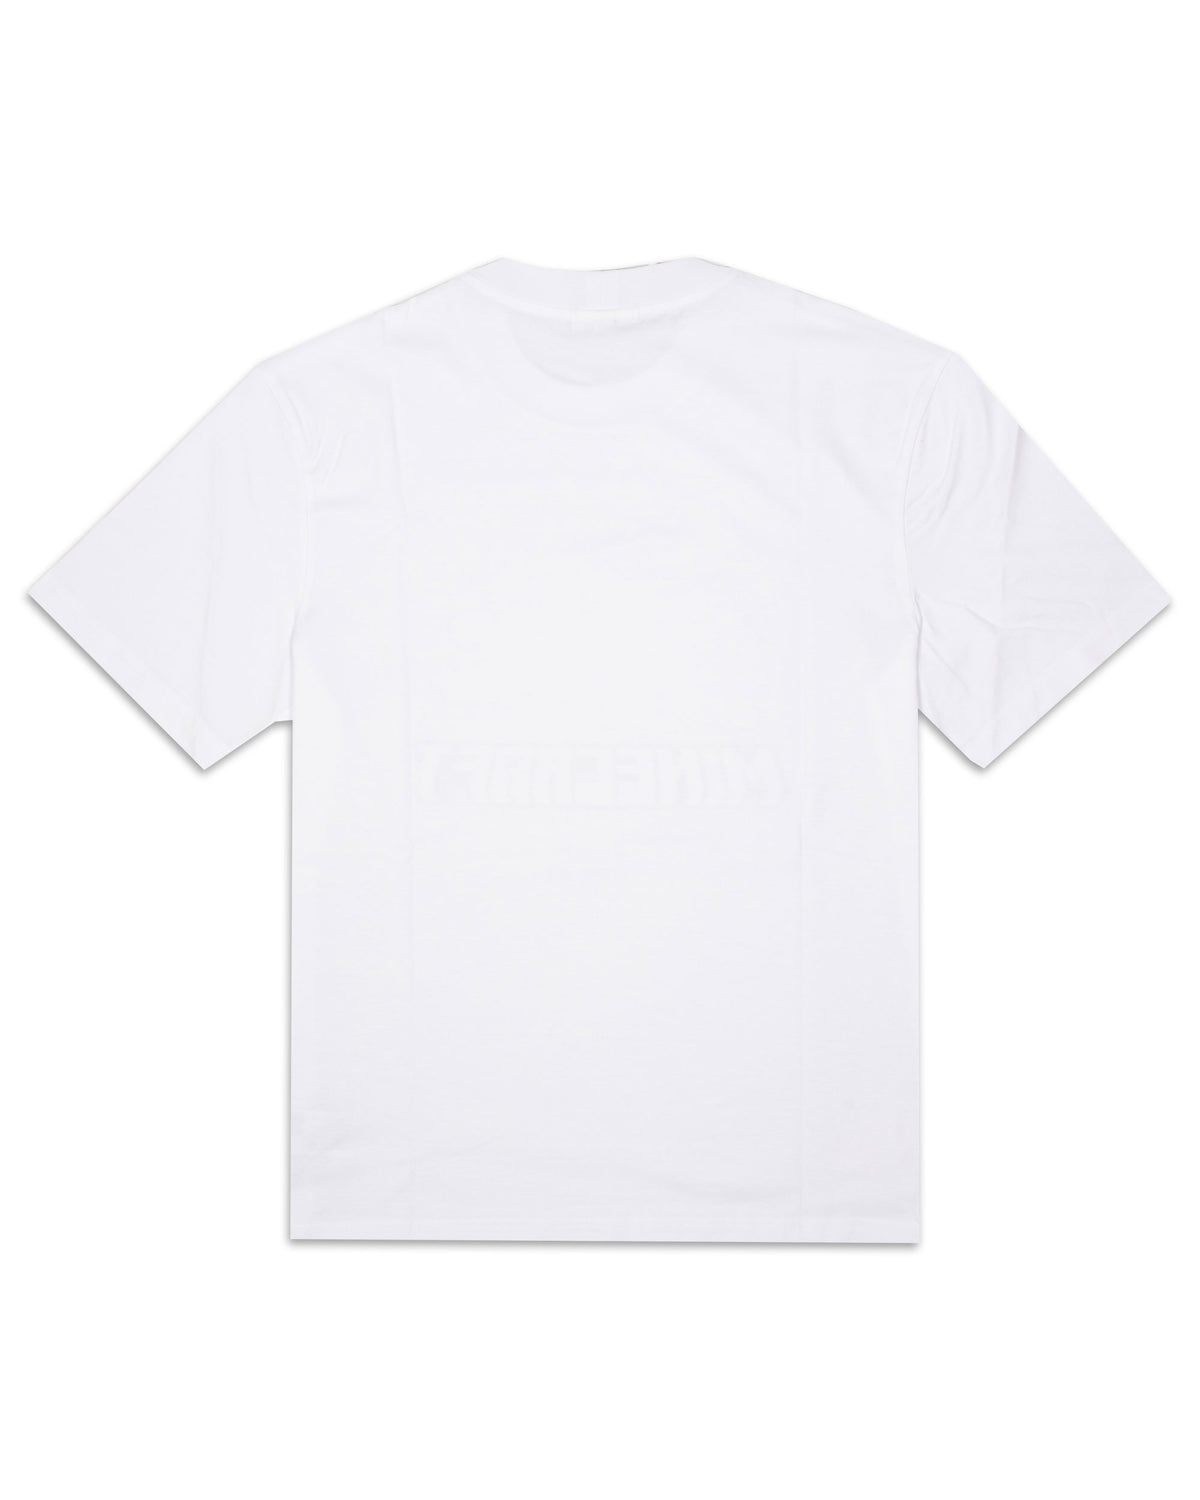 Lacoste x Minecraft T-Shirt White TH5038-001